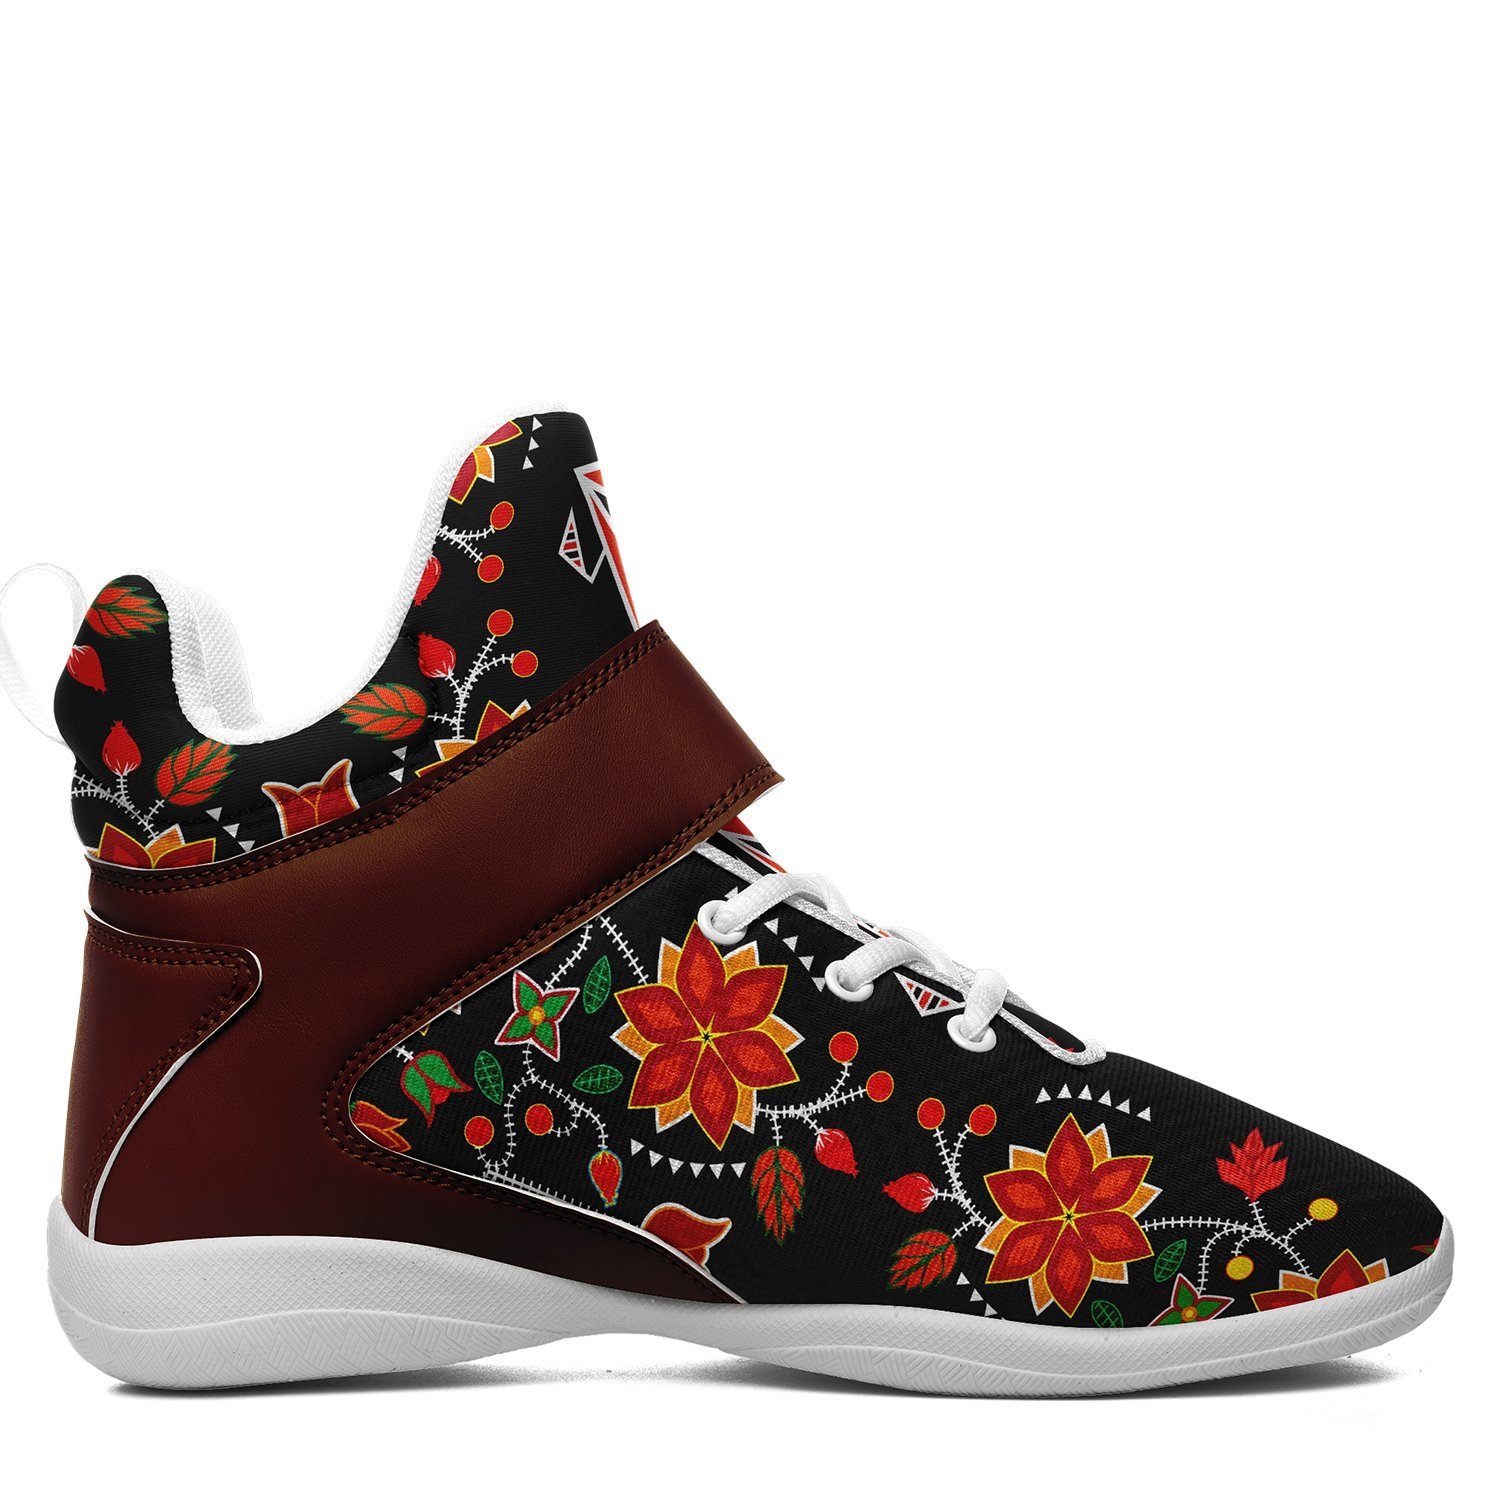 Floral Beadwork Six Bands Ipottaa Basketball / Sport High Top Shoes - White Sole 49 Dzine 